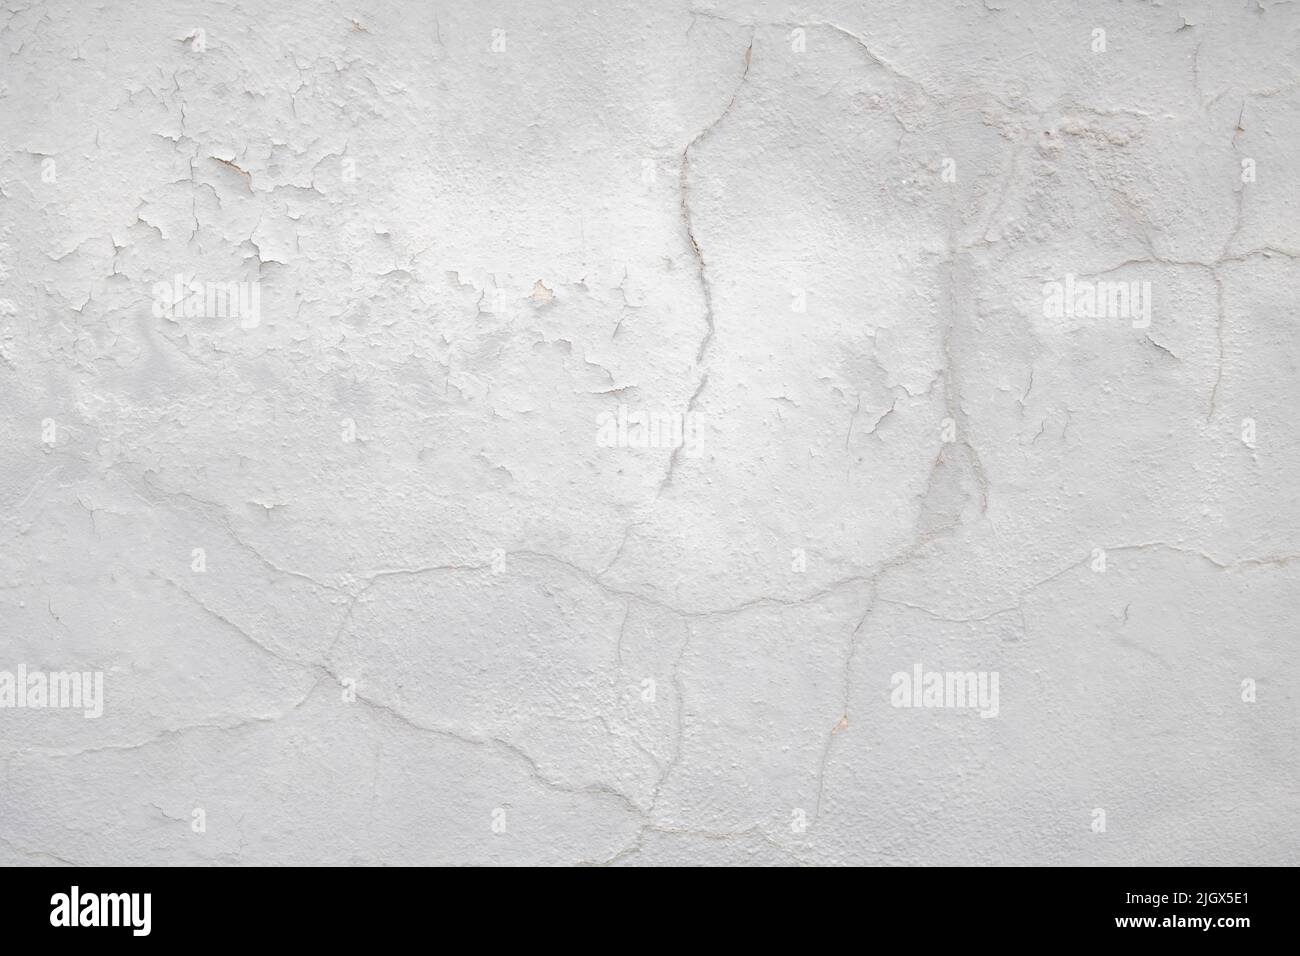 abstract distressed textured cement painted surface background Stock Photo